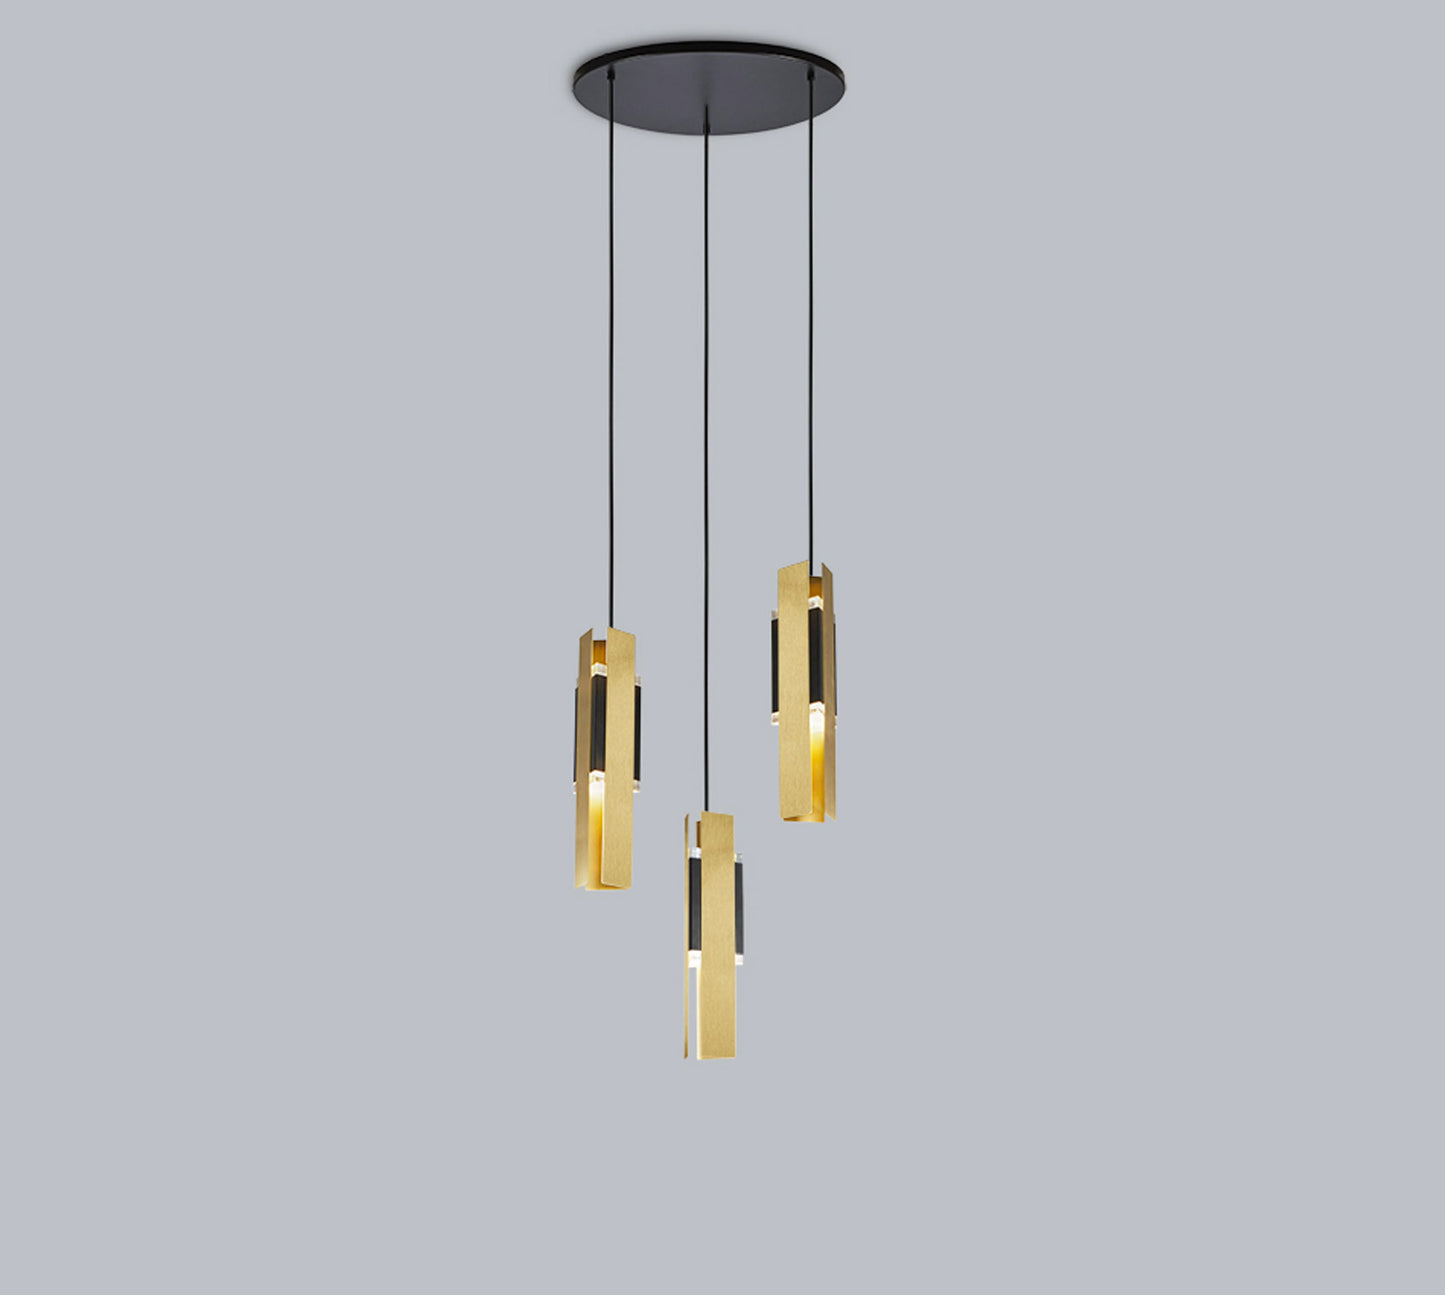 EXCALIBUR CHANDELIER 559.13 BY TOOY $2,948.00